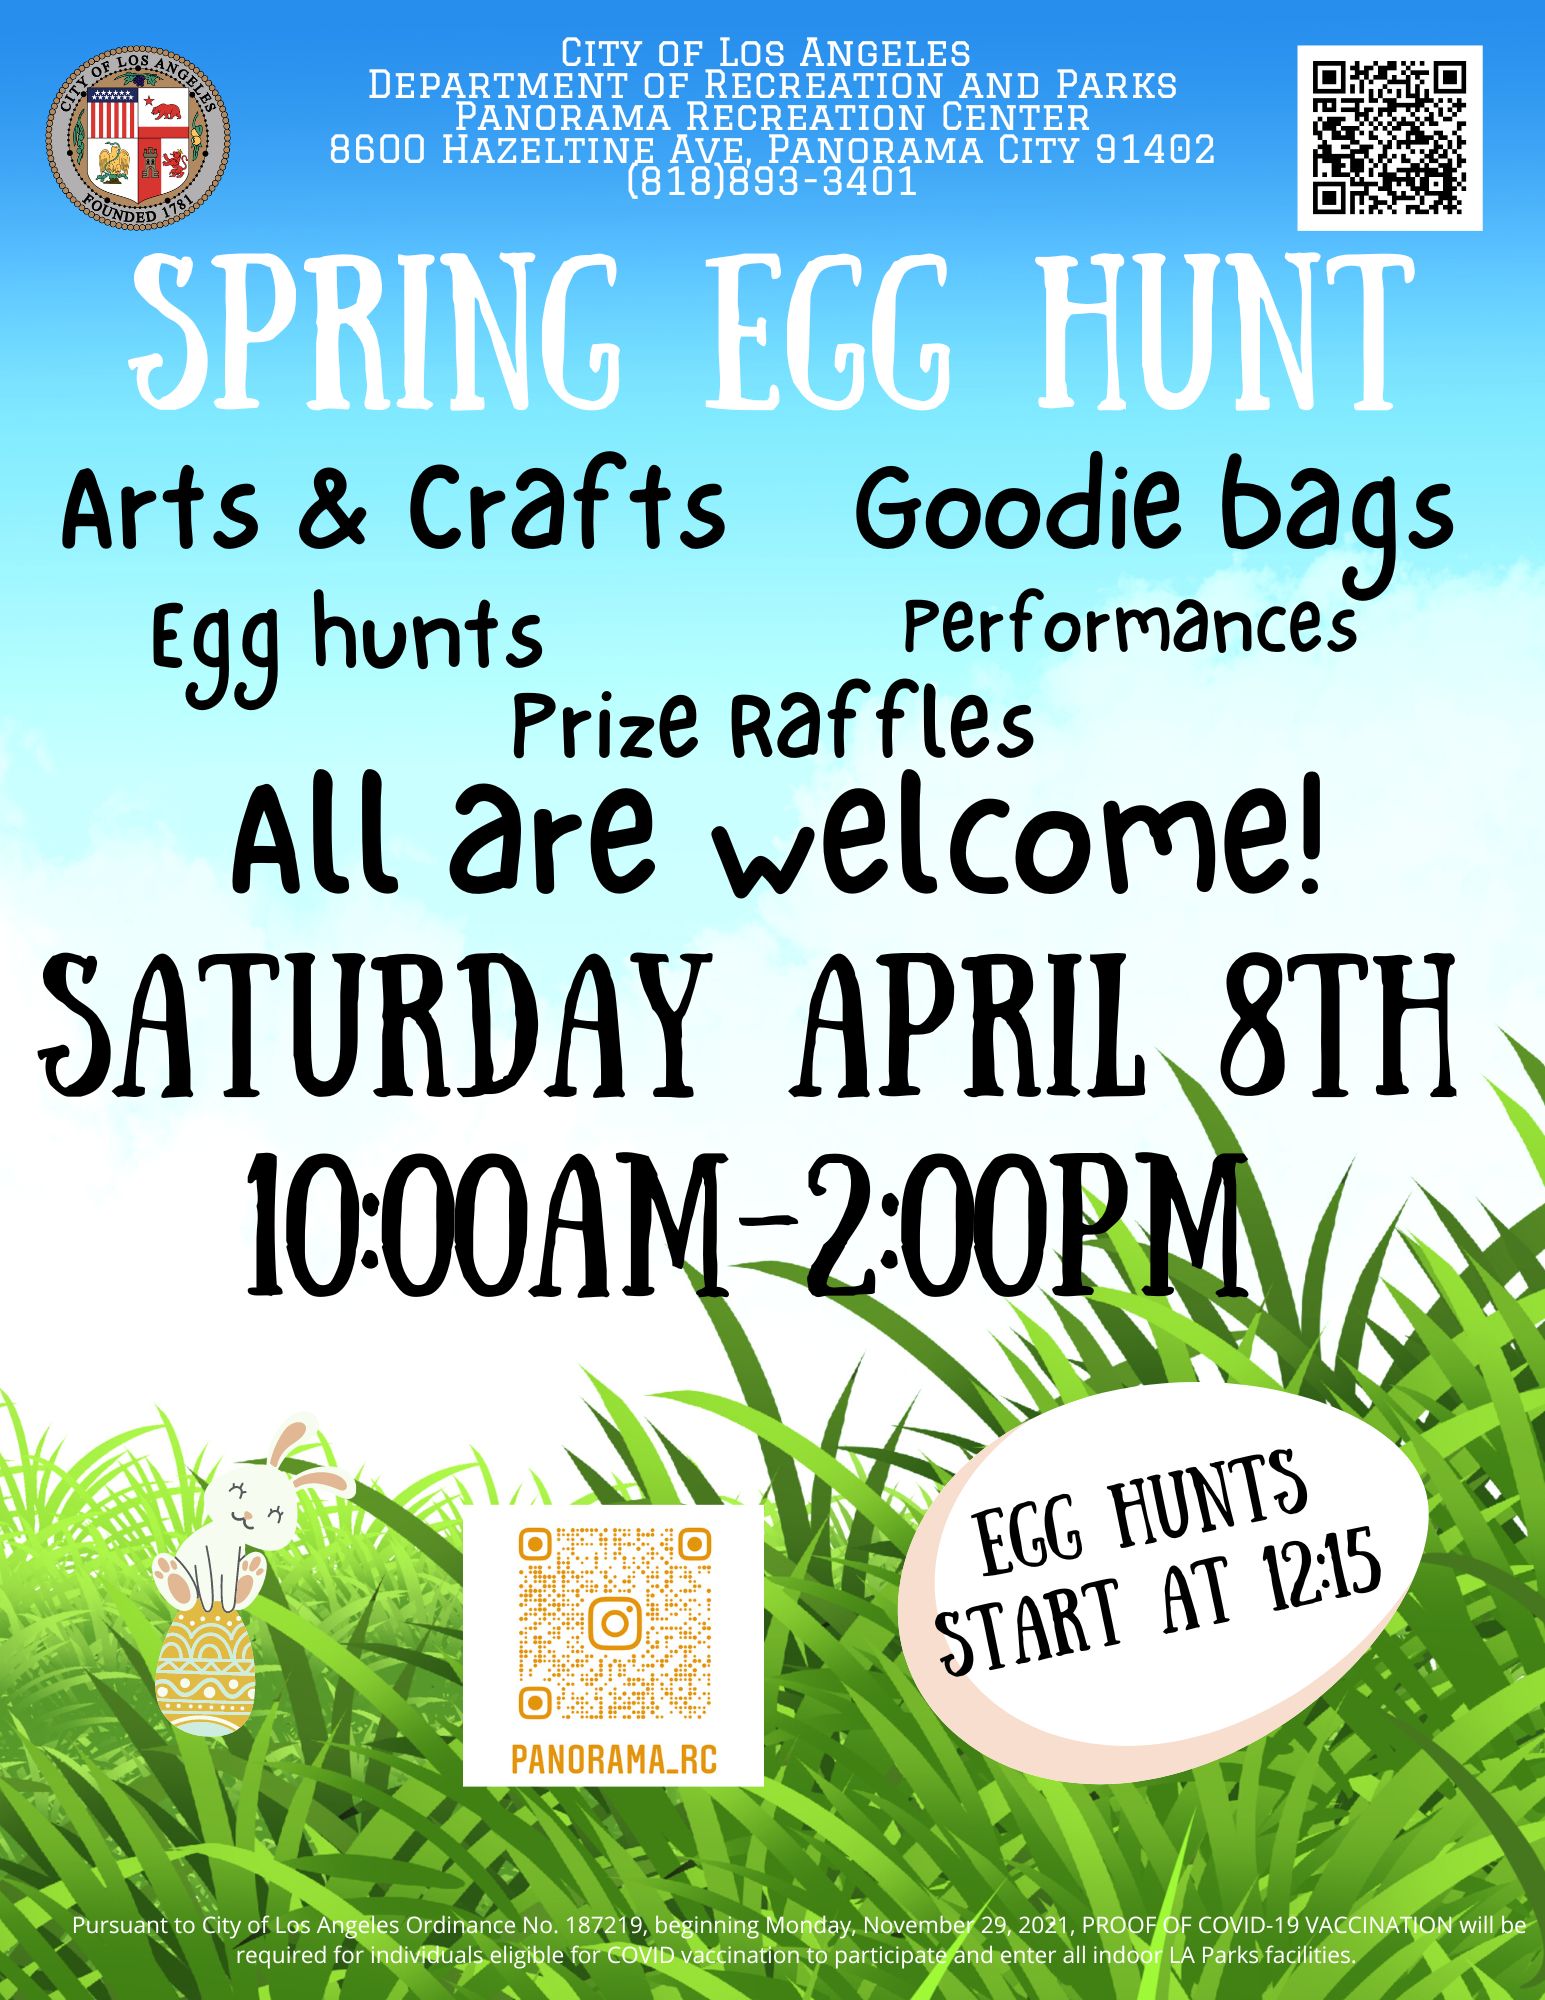 Join Us for Our Spring Egg Hunt!